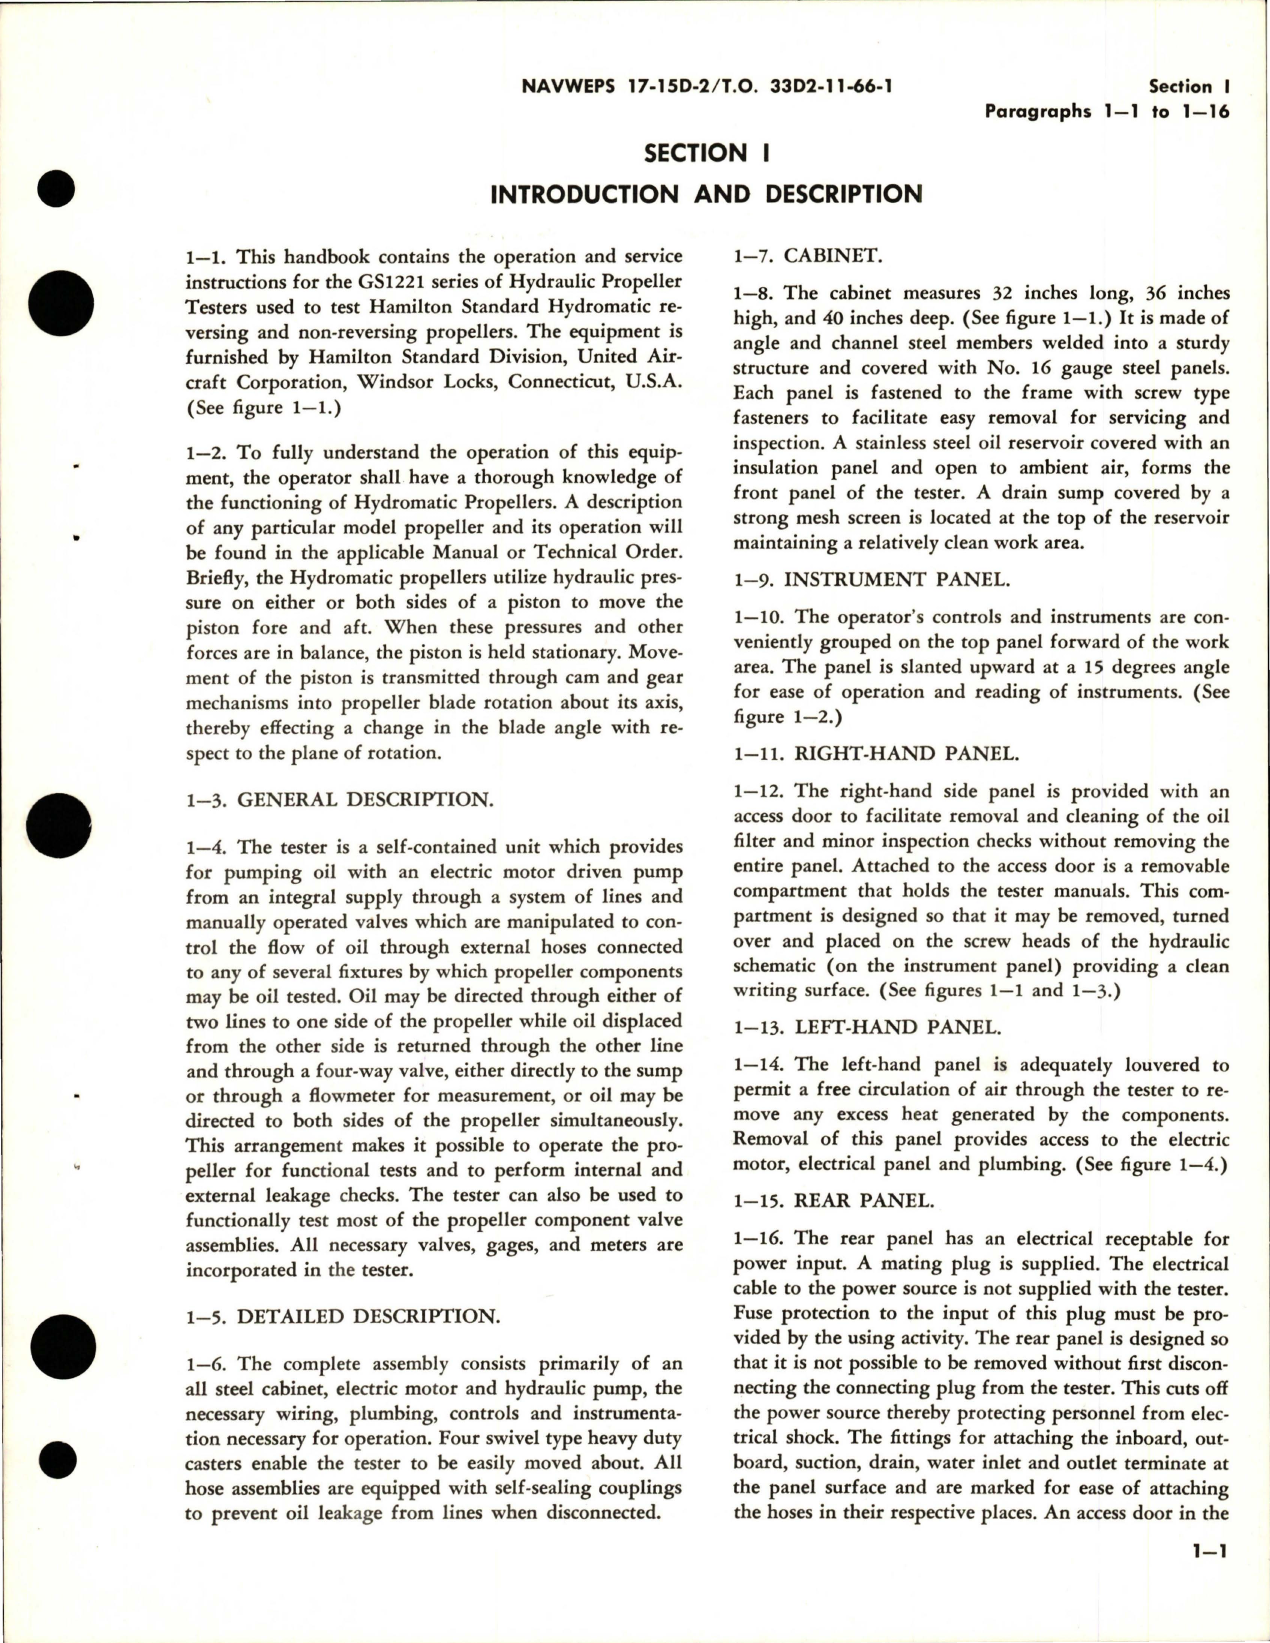 Sample page 5 from AirCorps Library document: Operation, Service Instructions and Illustrated Parts Breakdown for Hydraulic Propeller Testing 